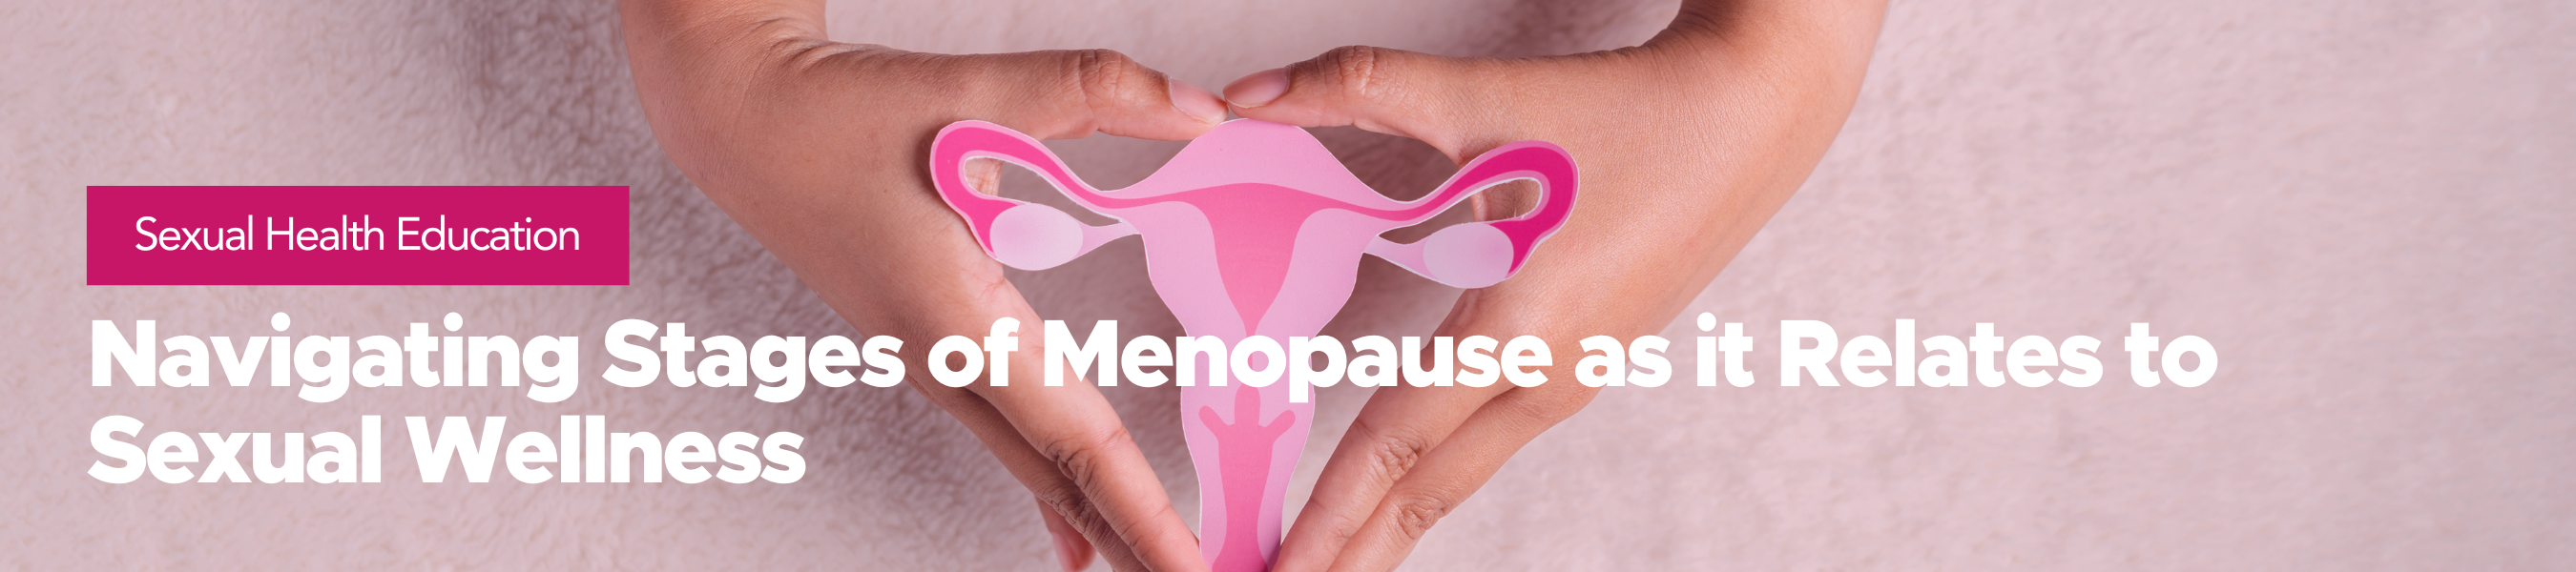 Sexual Health Education: Navigating Stages of Menopause as it Relates to Sexual Wellness